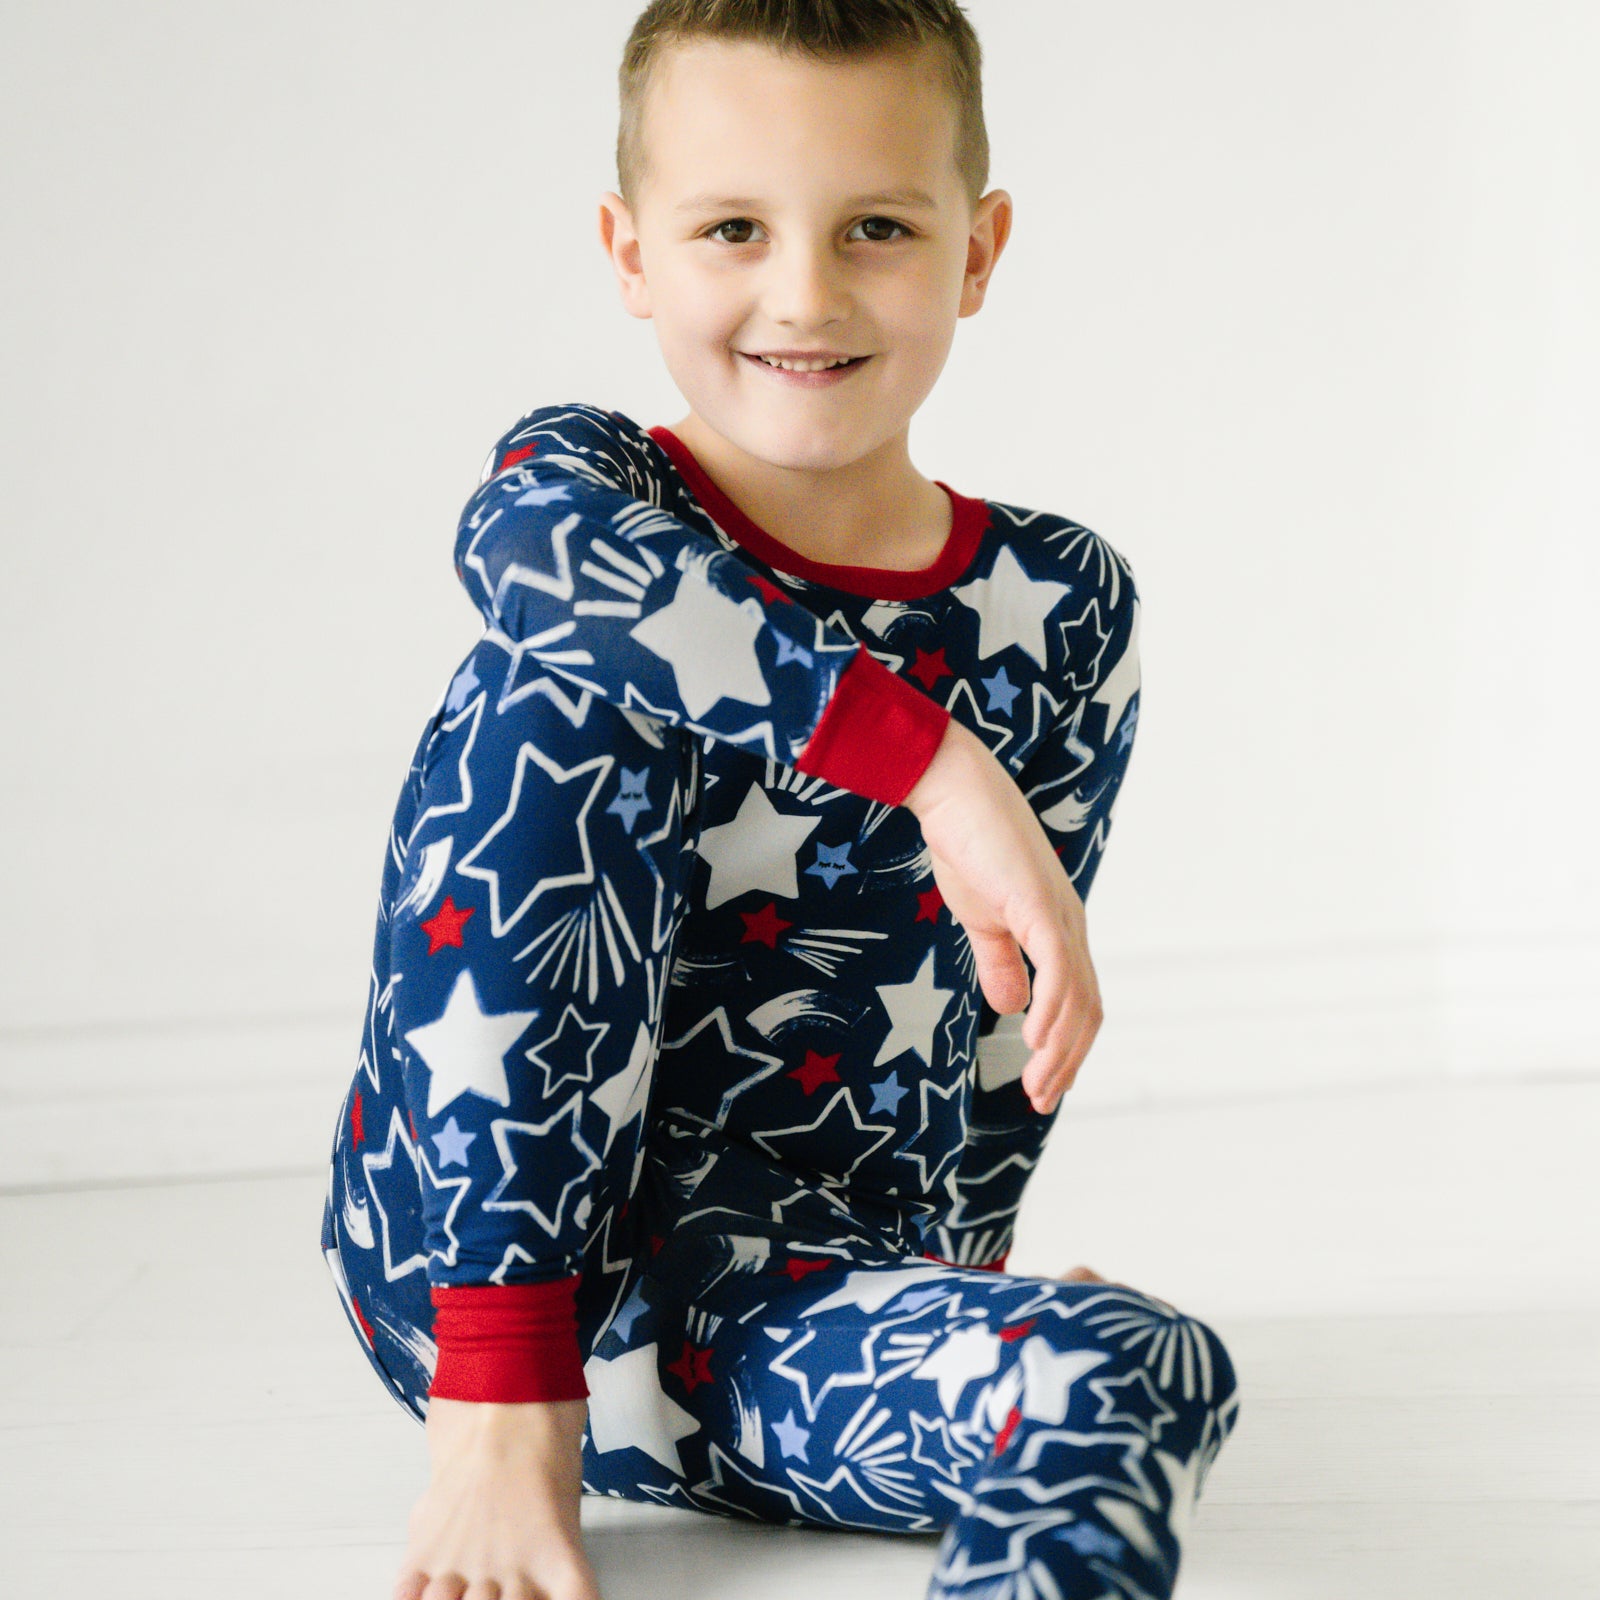 Alternate image of a child sitting wearing a Star Spangled two piece pajama set